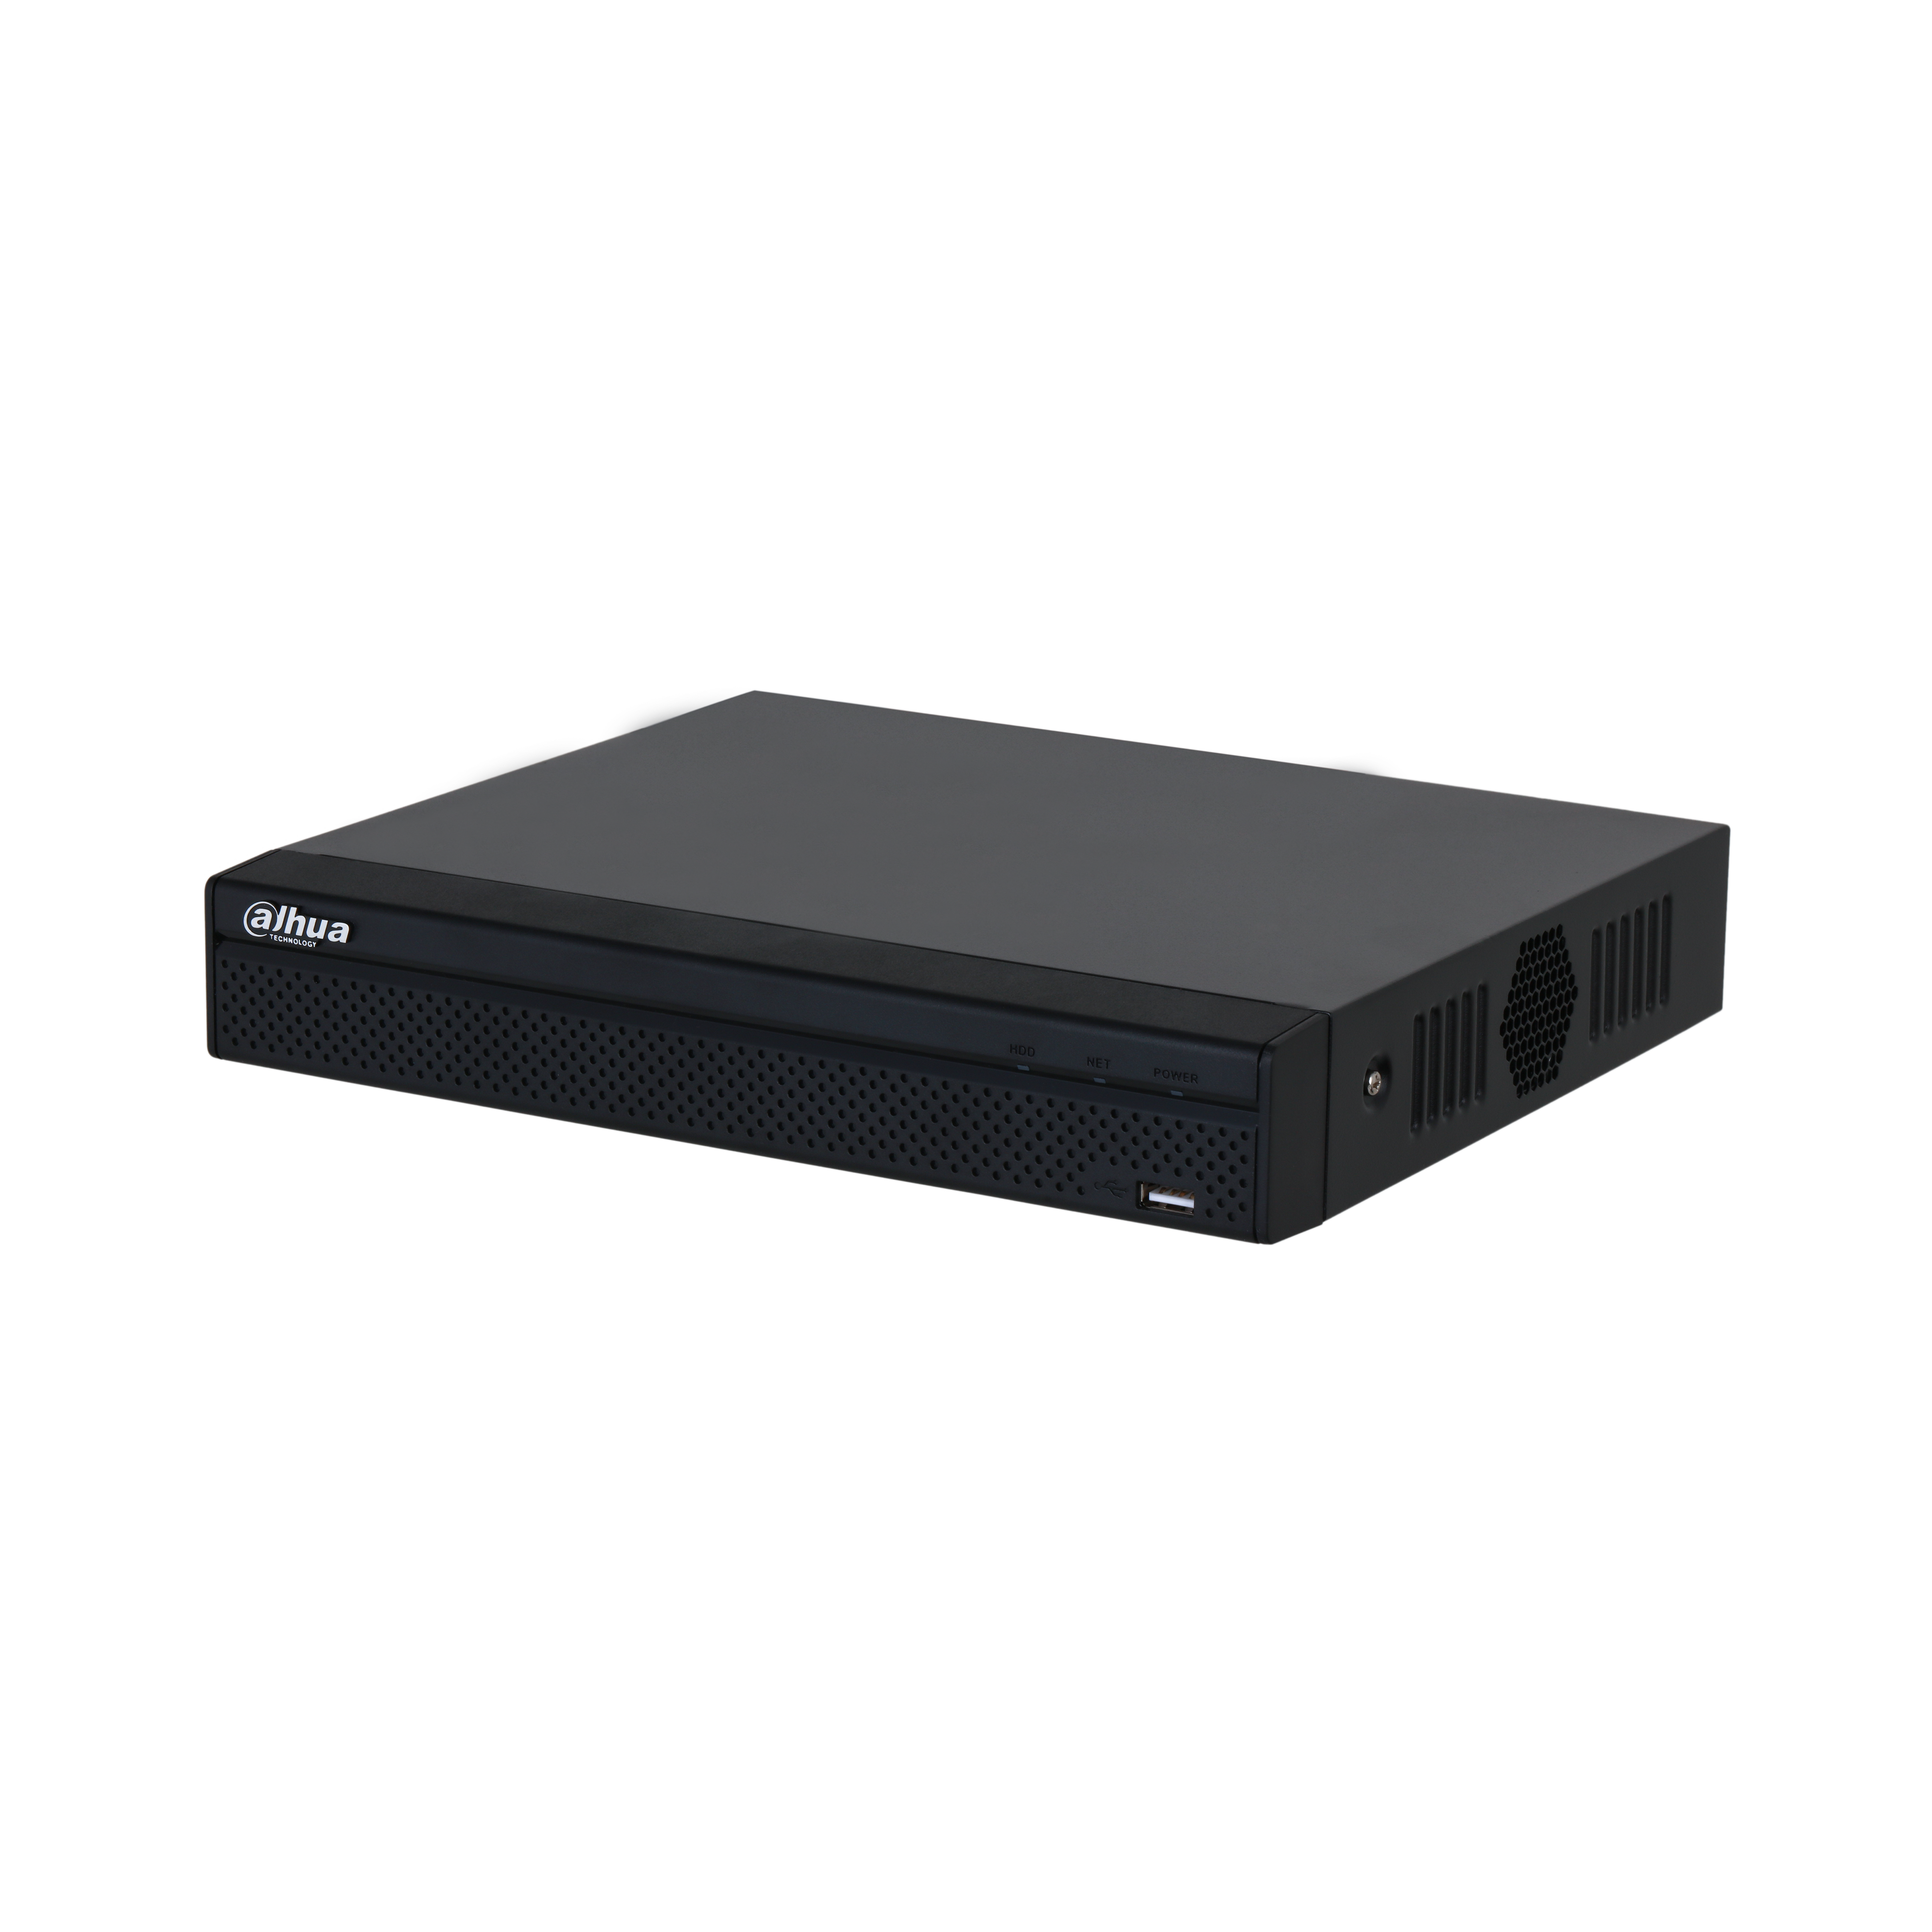 DAHUA NVR2104HS-S3 4 Channel Compact 1U 1HDD Network Video Recorder